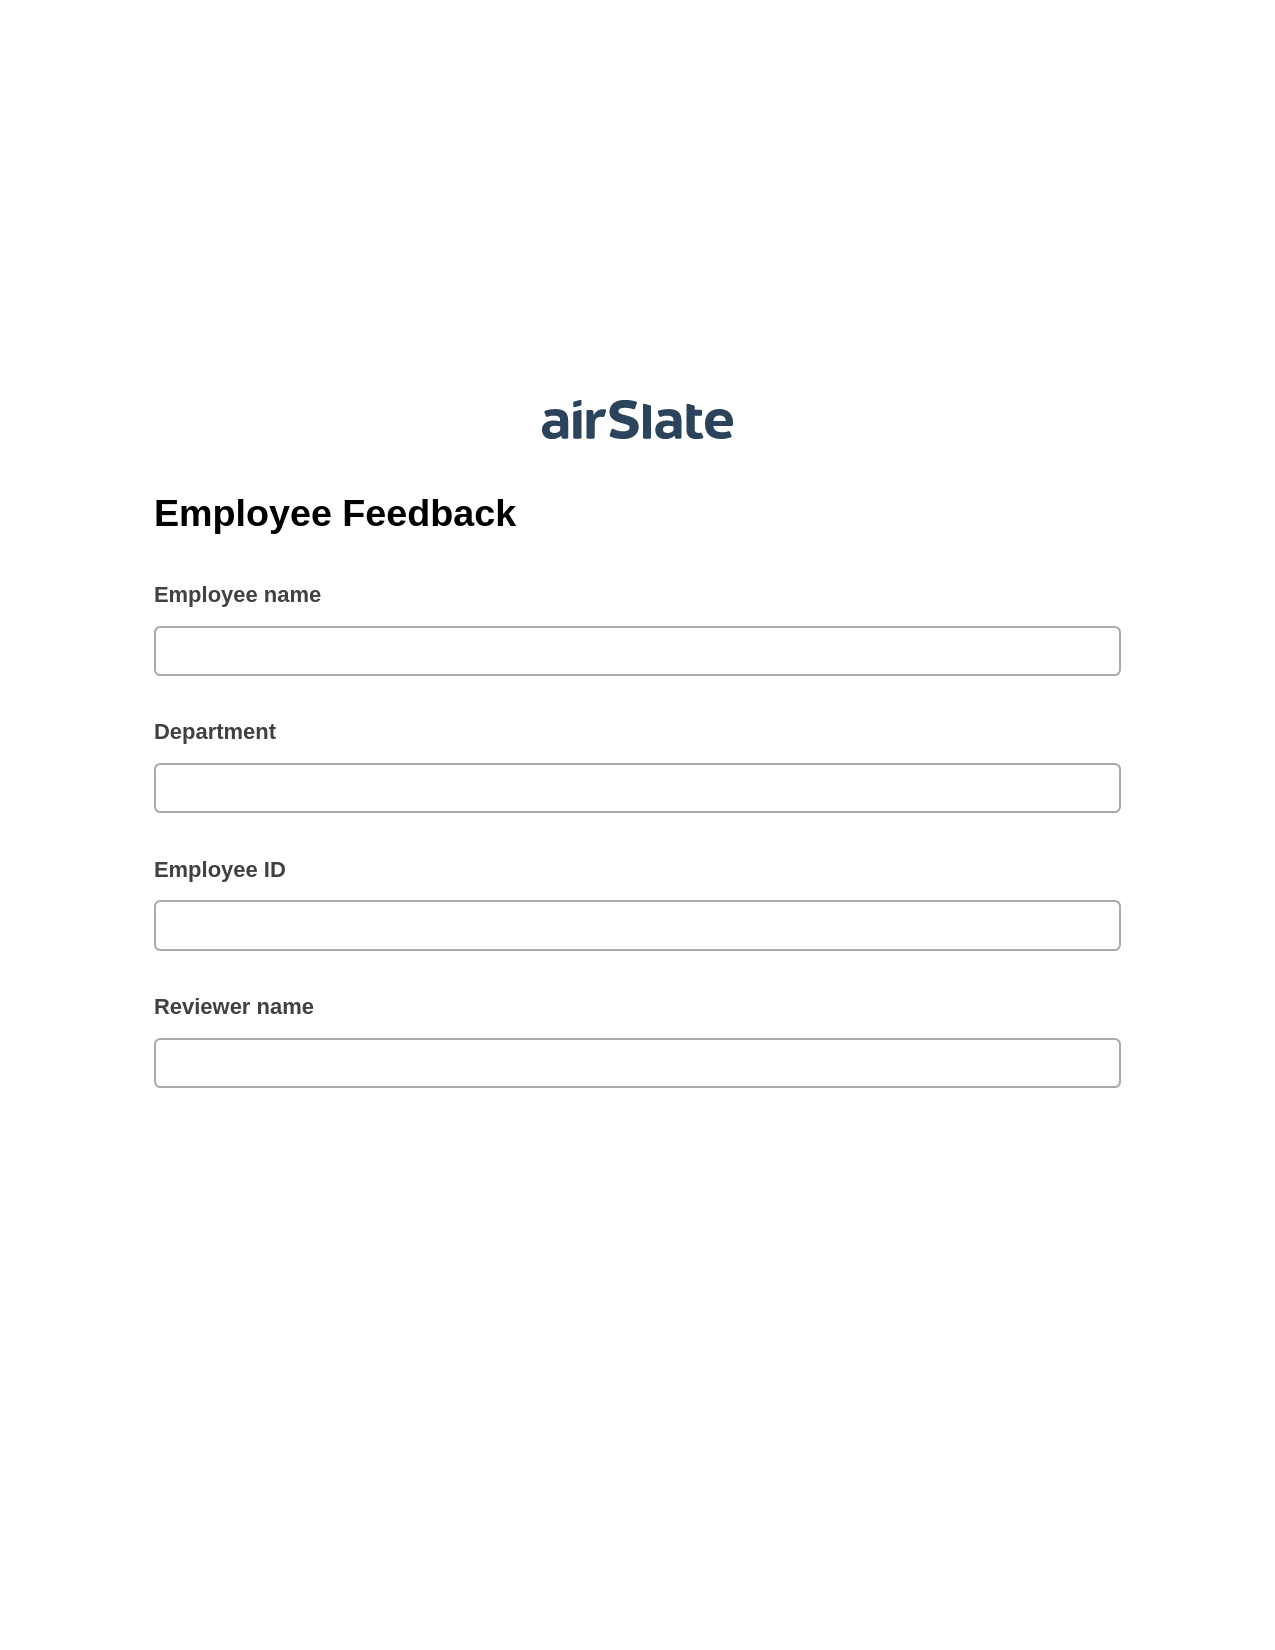 Employee Feedback Pre-fill Slate from MS Dynamics 365 Records Bot, Send a Slate with Roles Bot, Archive to SharePoint Folder Bot